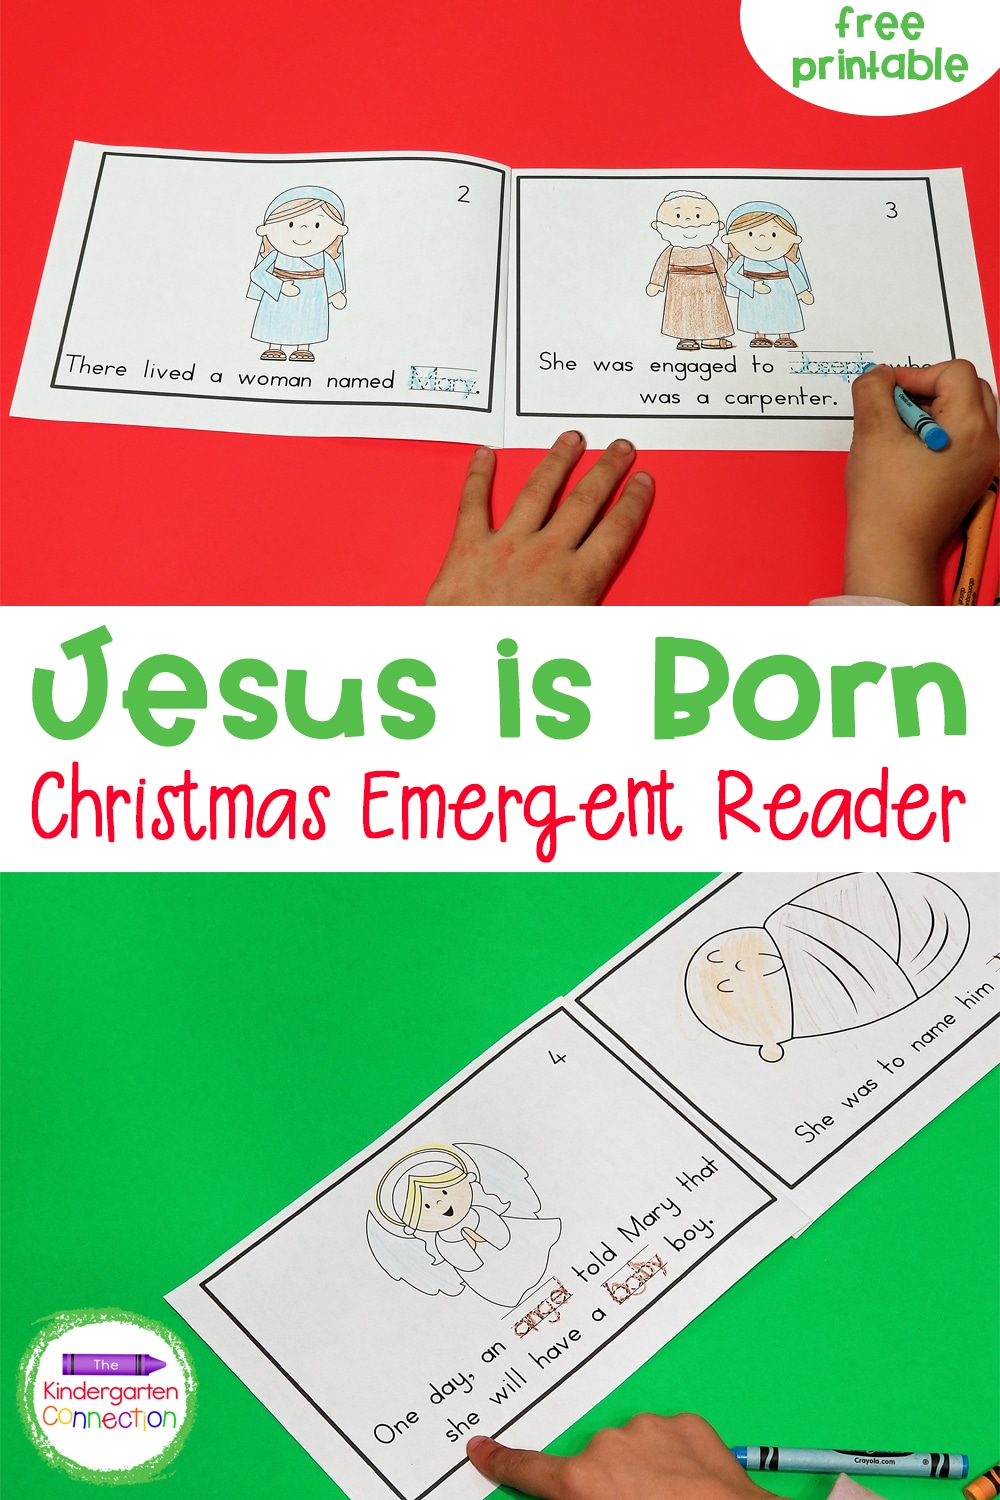 This free printable Christmas emergent reader is a great way to share the Christmas story with kids and learn about the birth of Jesus!